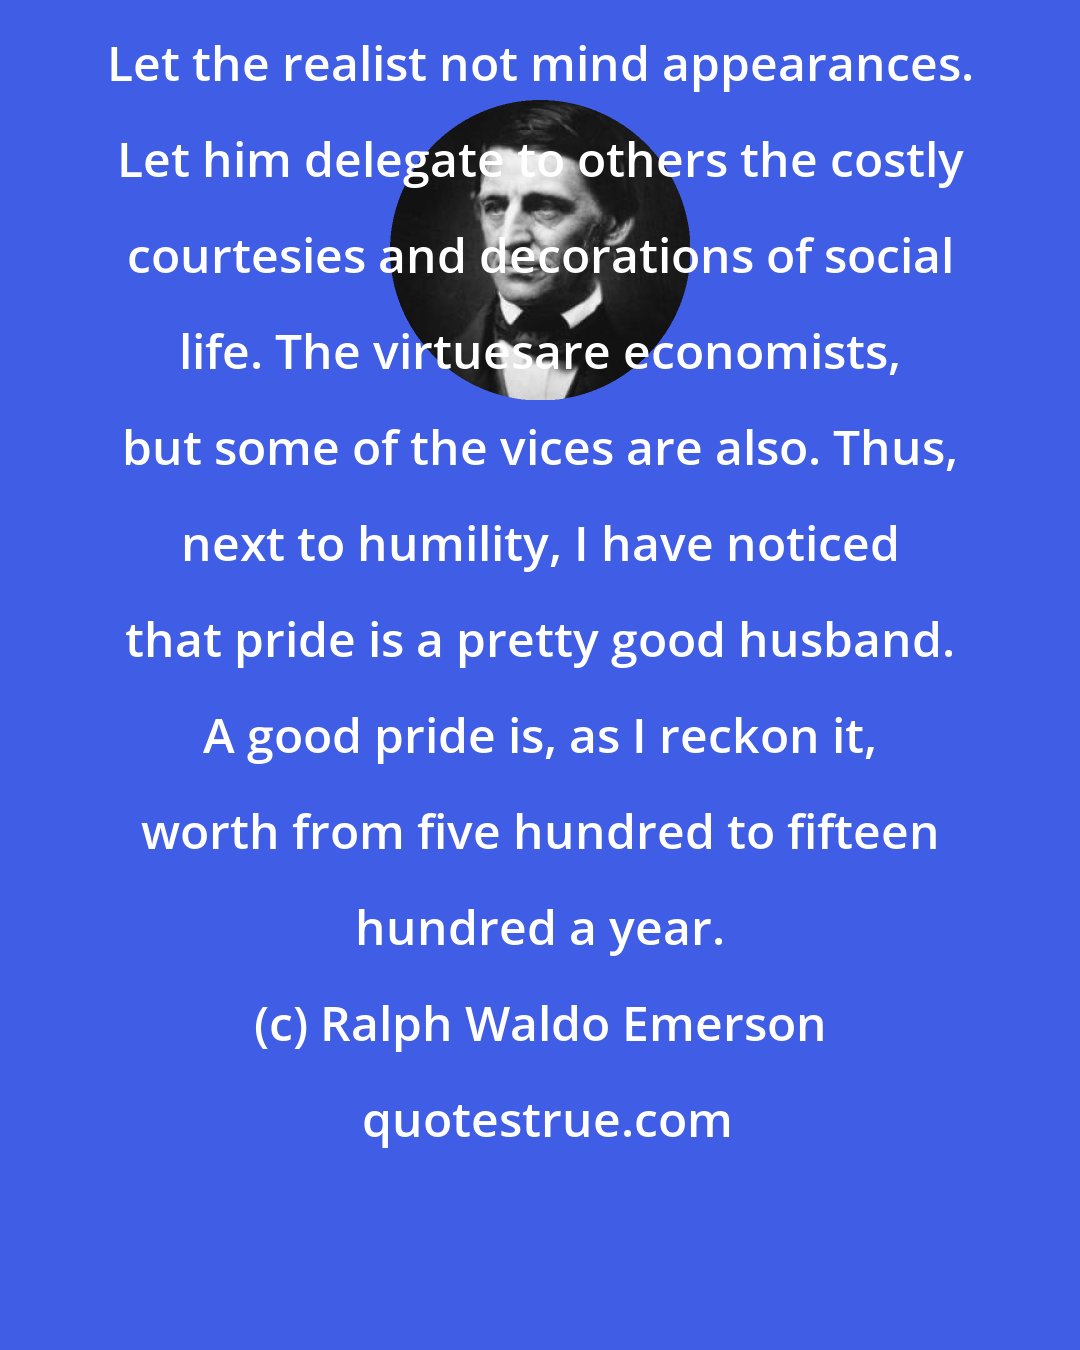 Ralph Waldo Emerson: Let the realist not mind appearances. Let him delegate to others the costly courtesies and decorations of social life. The virtuesare economists, but some of the vices are also. Thus, next to humility, I have noticed that pride is a pretty good husband. A good pride is, as I reckon it, worth from five hundred to fifteen hundred a year.